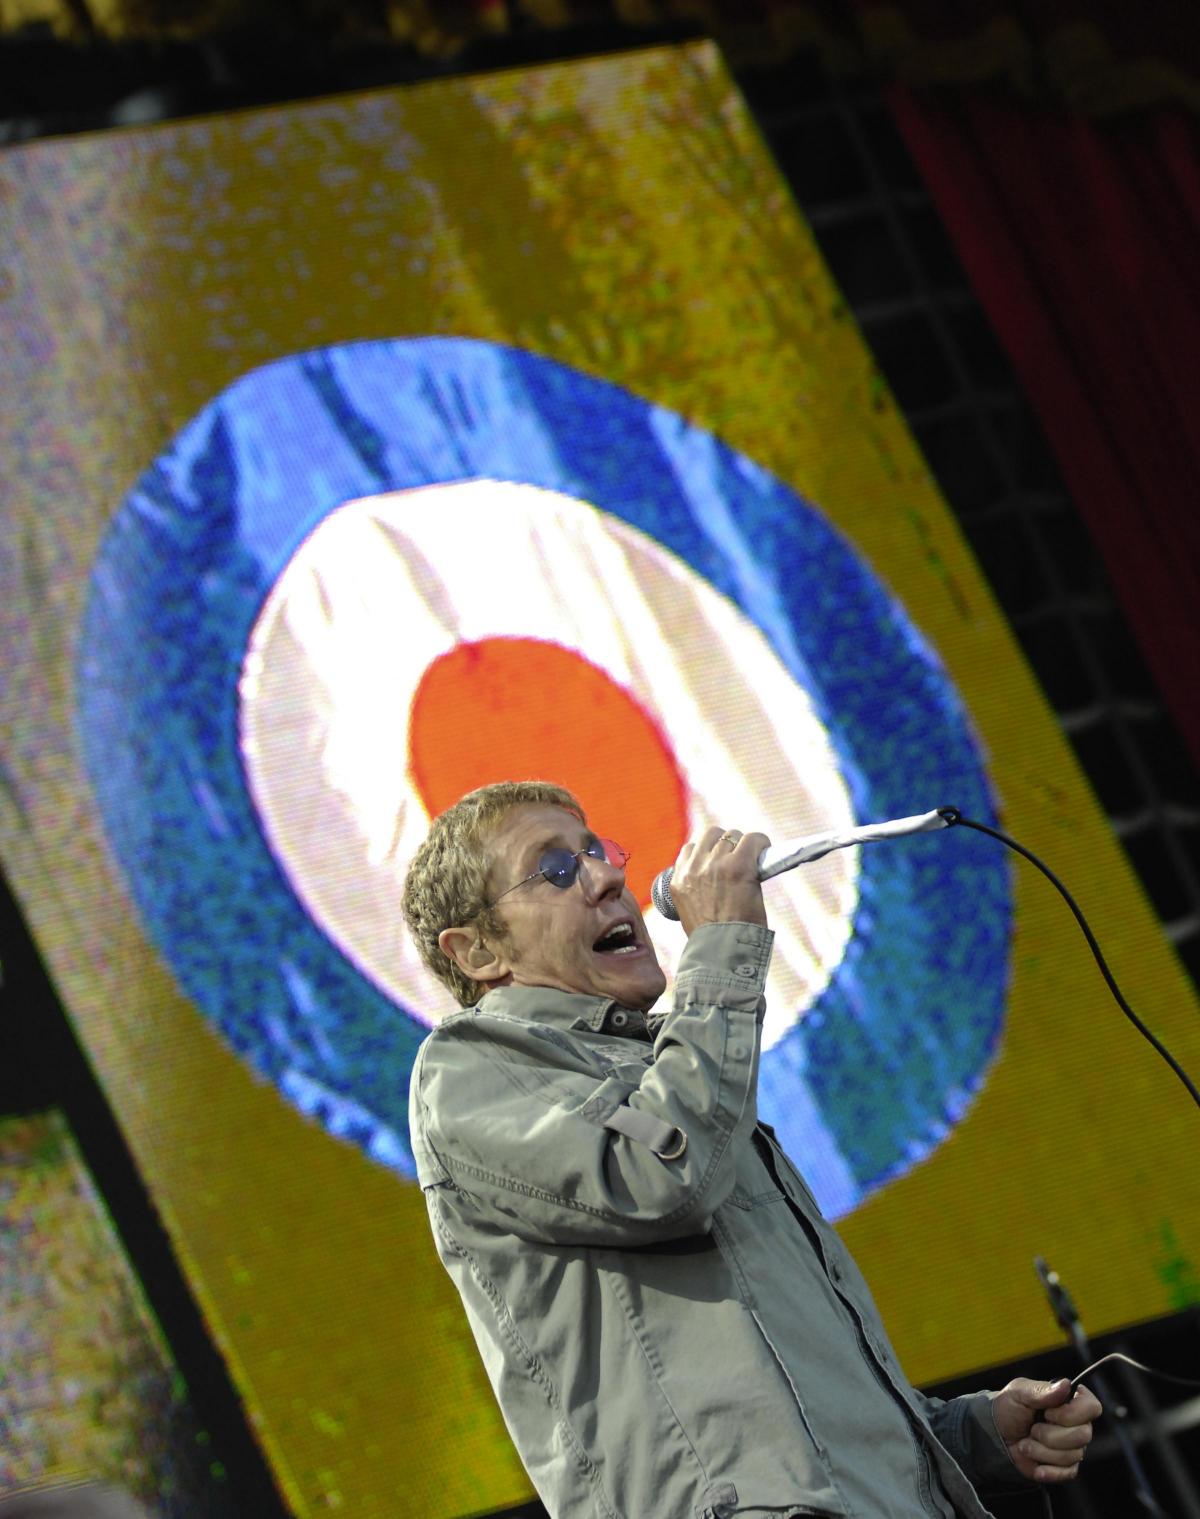 Past concerts at Rose Bowl - The Who